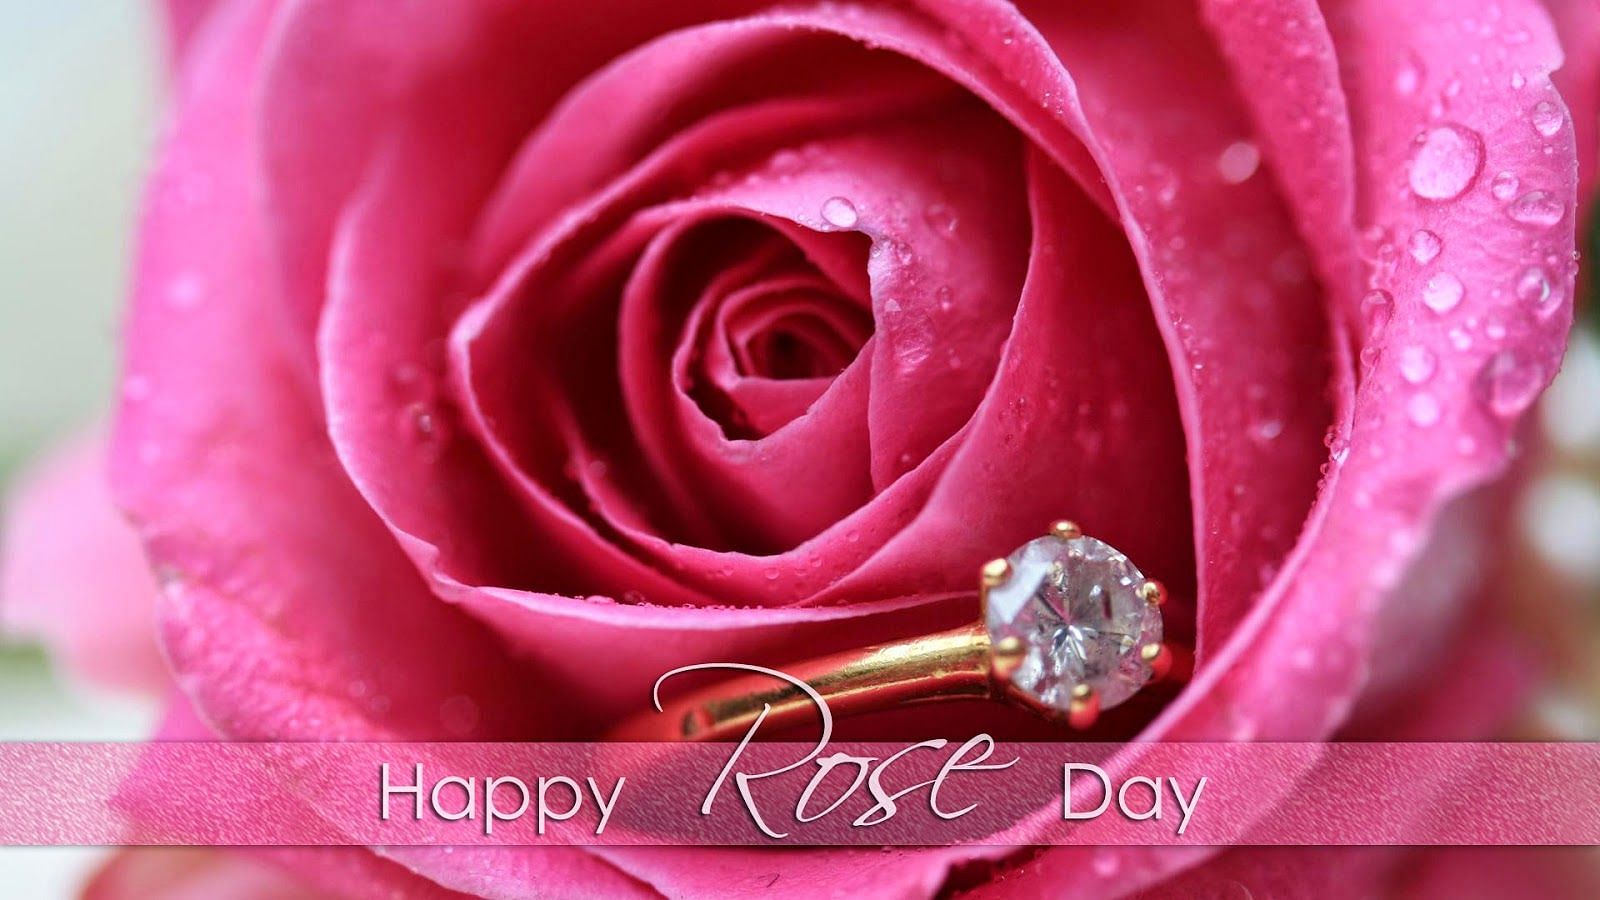 Happy Rose Day 2022: Wishes, Images, Quotes, Wallpapers, Gif, SMS ...